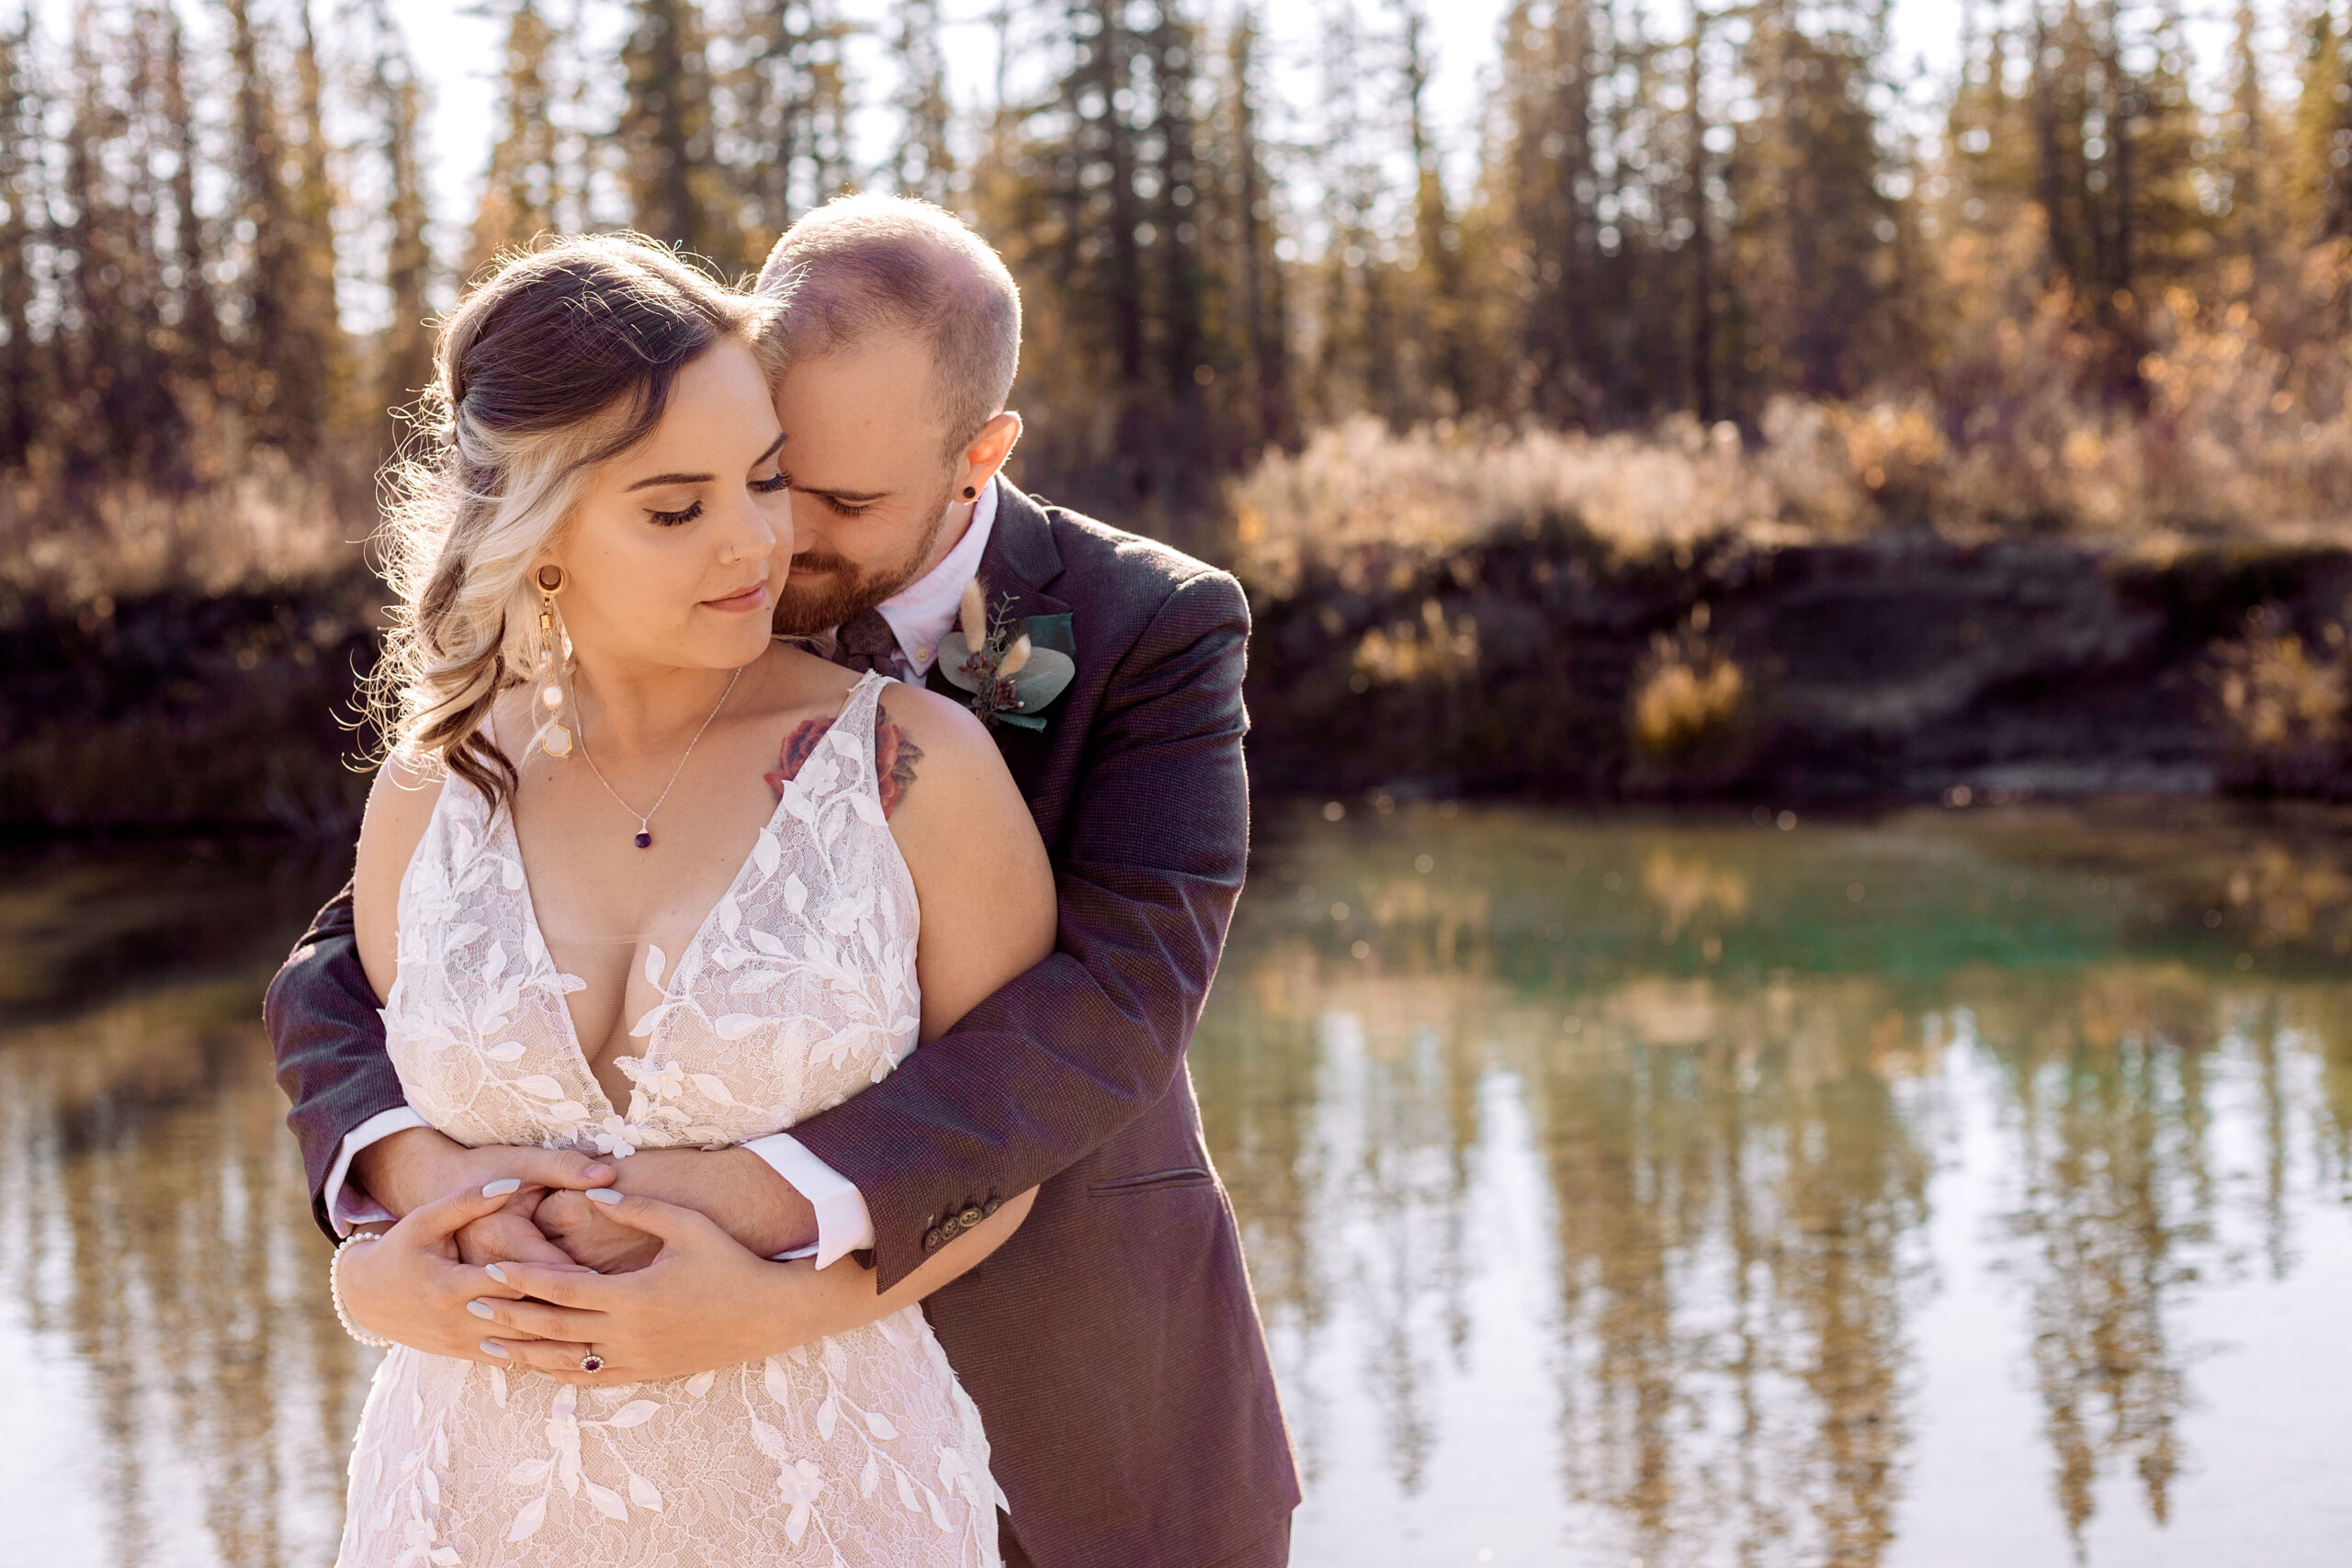 Groom wrapping his arms around bride from behind with his nose nuzzled into new neck. Bride looks down gently to the side. The couple is in front of a river with spruce trees in the background.